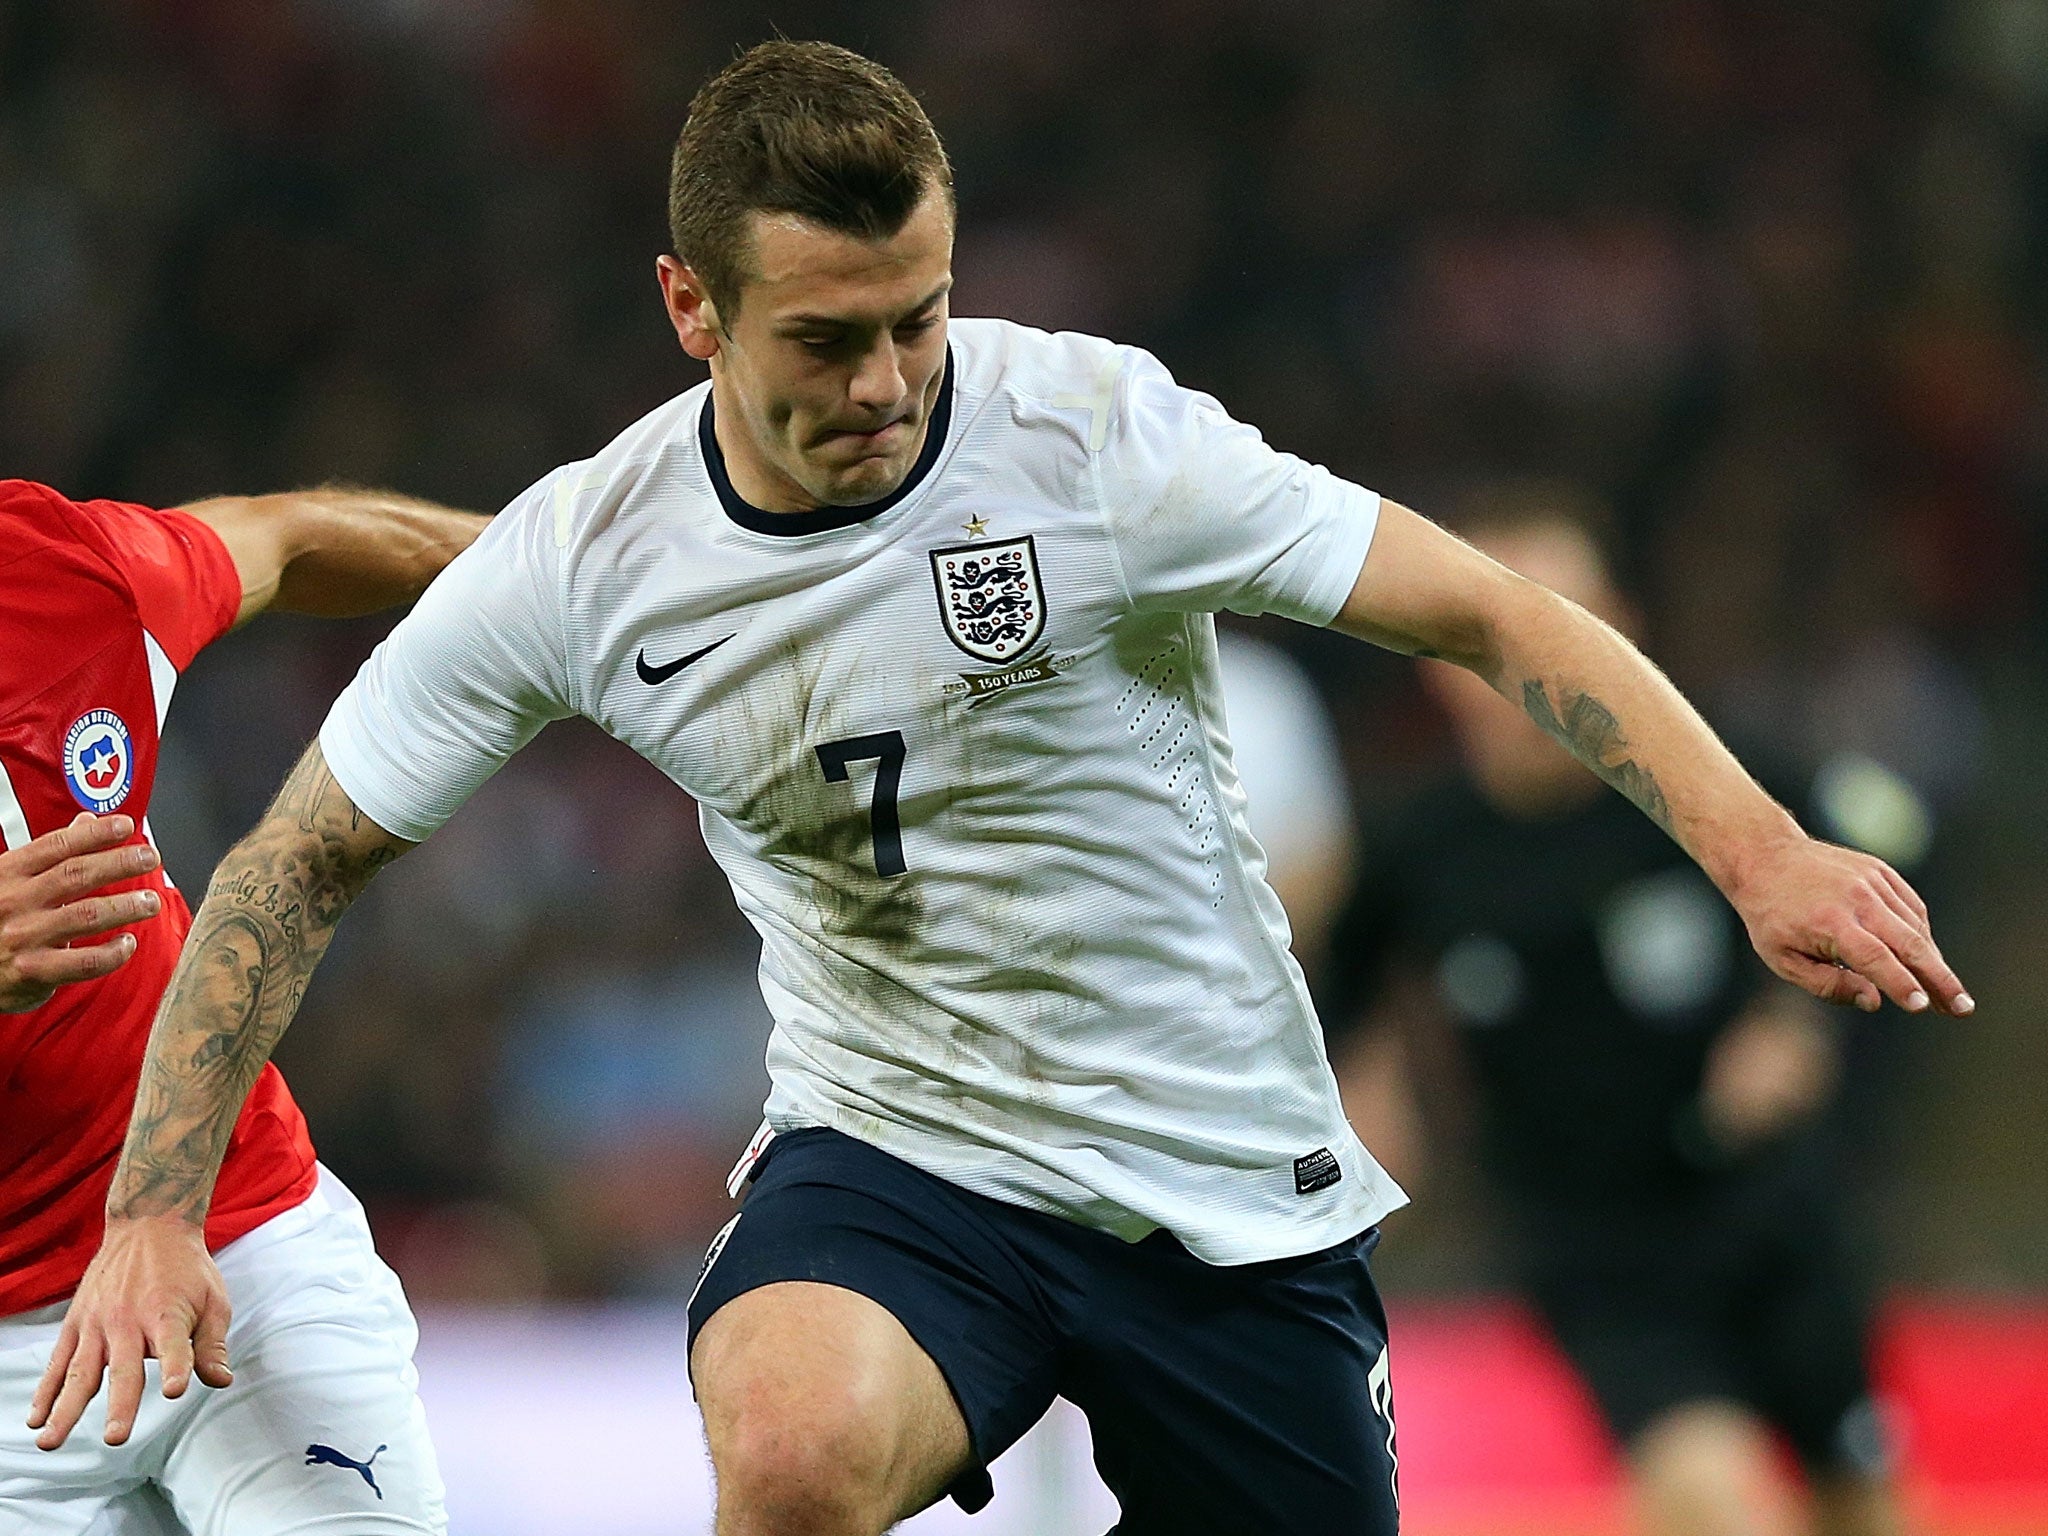  Jack Wilshere in action during his England debut against Chile at Wembley Stadium.